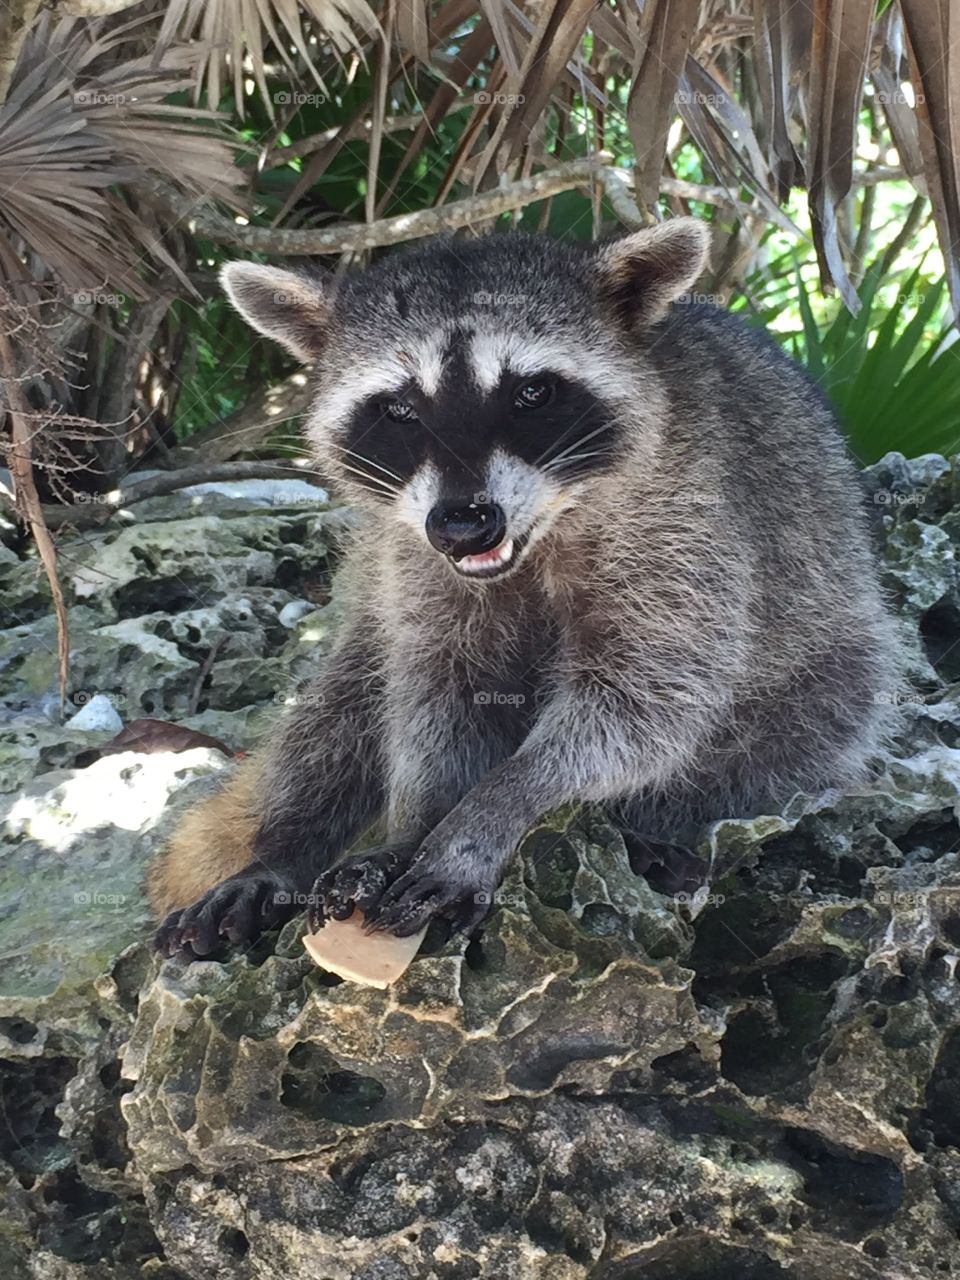 Racoon in Mexico